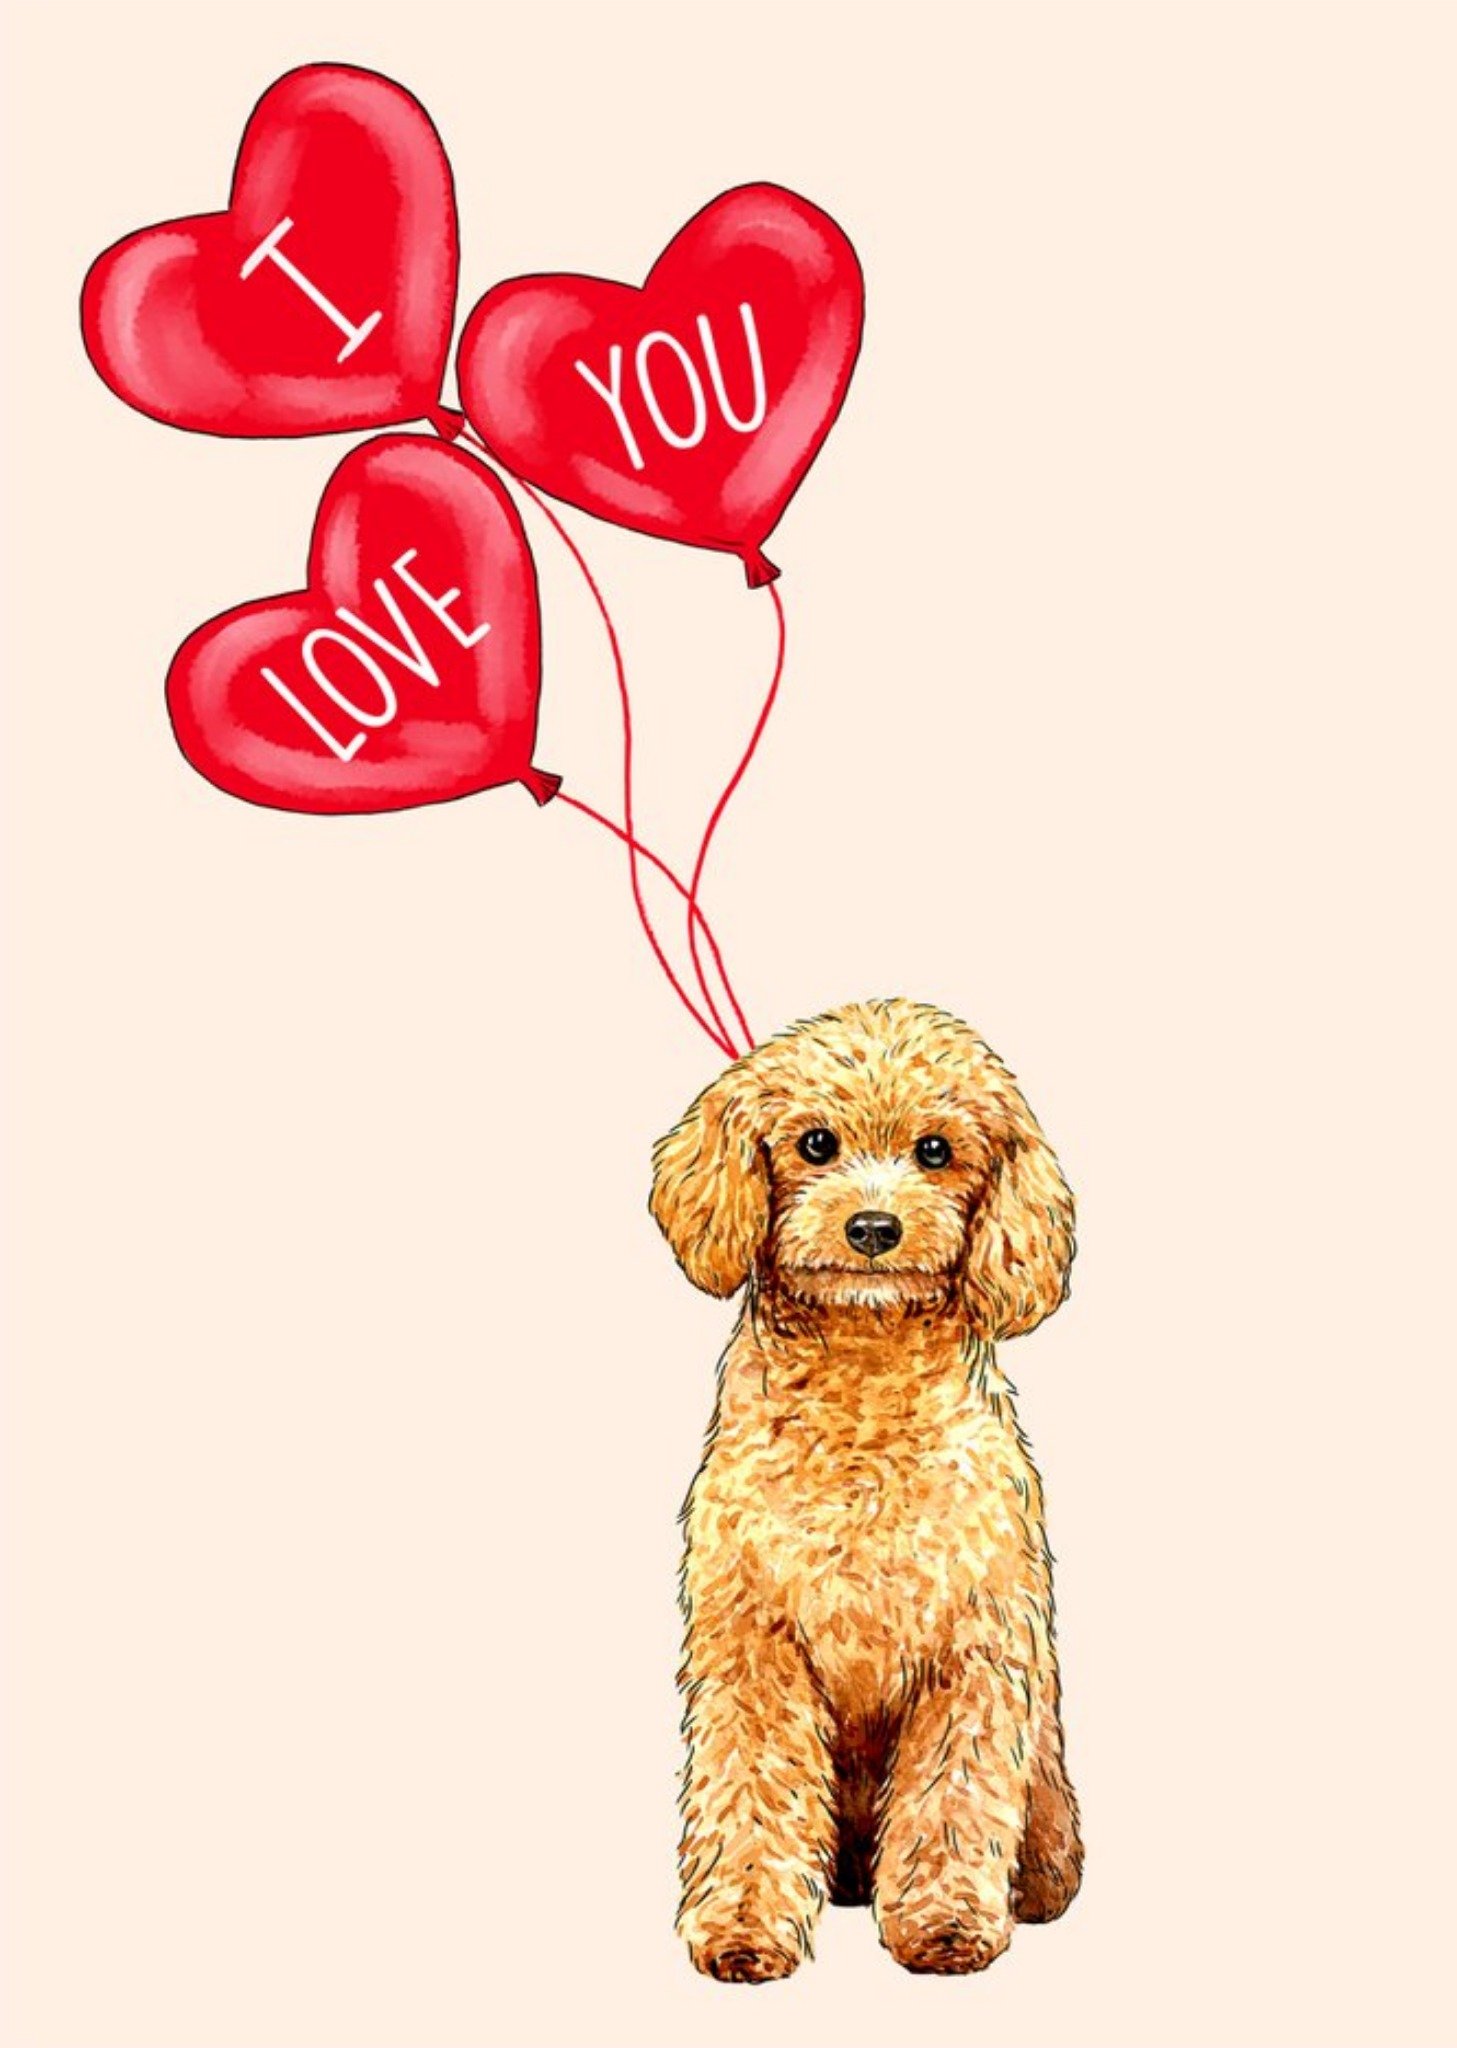 Moonpig Poppy And Mabel Illustration Of A Cockapoo And Loveheart Balloons. I Love You Card Ecard